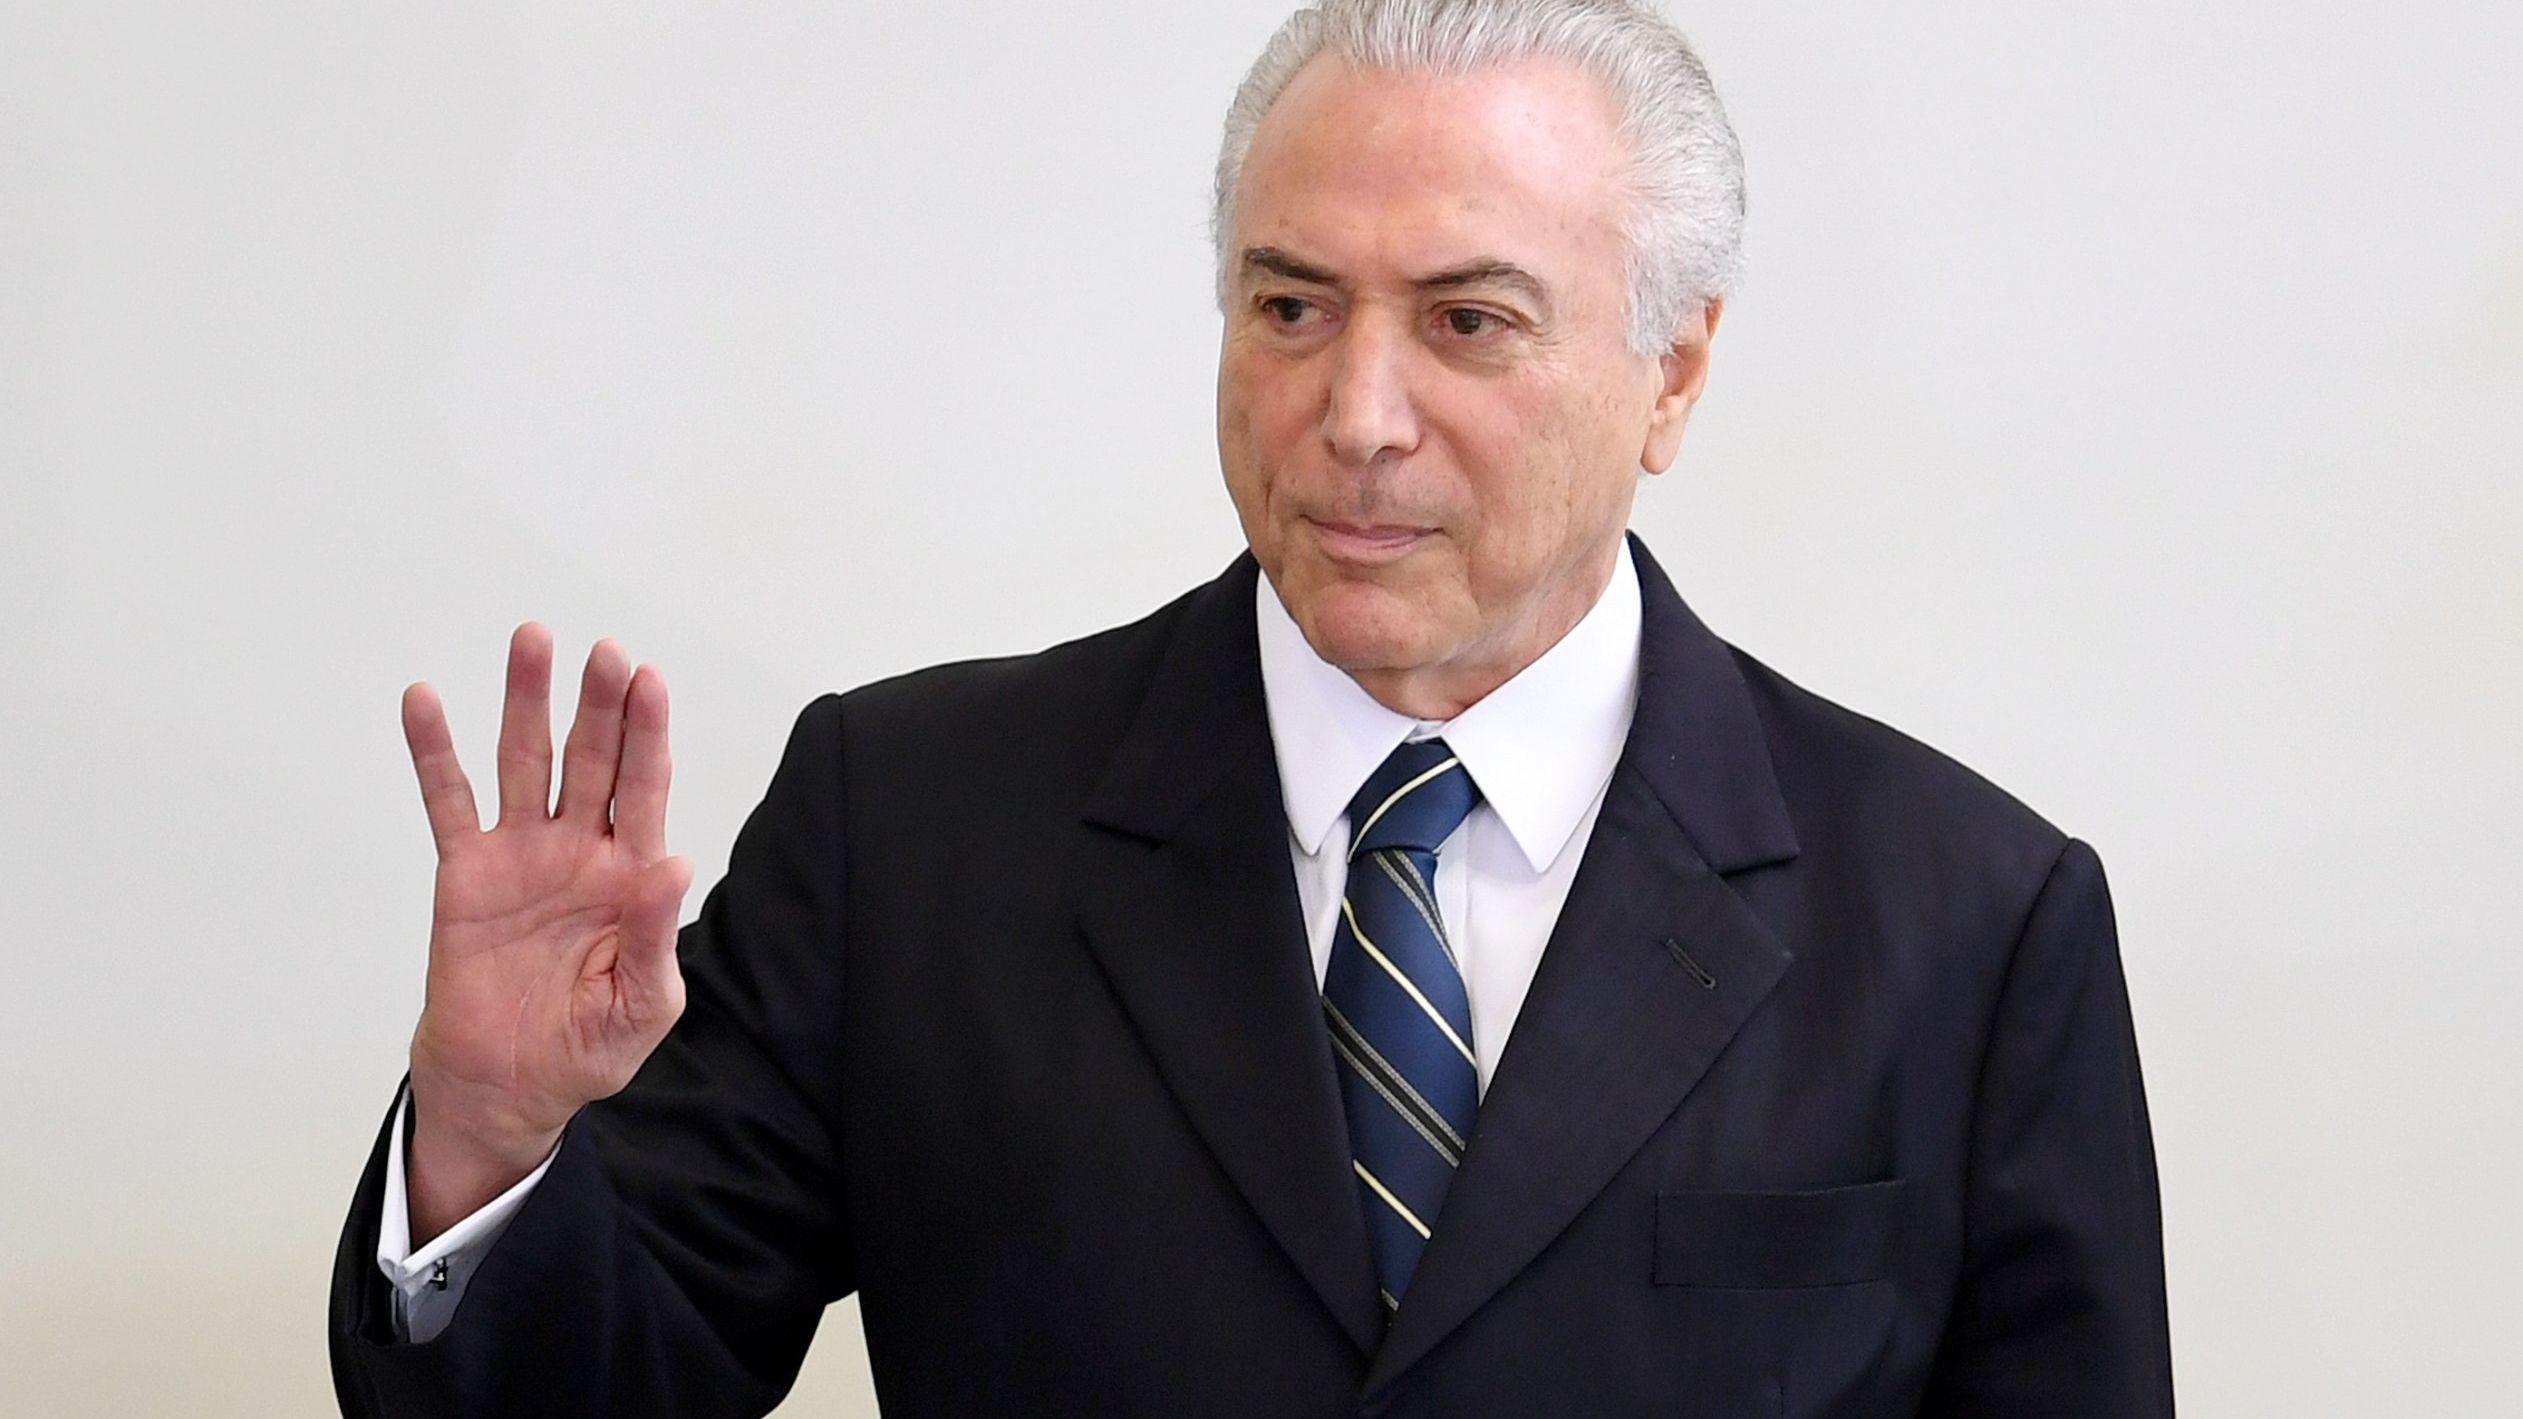 Brazilian president Michel Temer takes part in a "Year of Achievements" meeting to mark of the first year of his presidency on May 12, 2017.